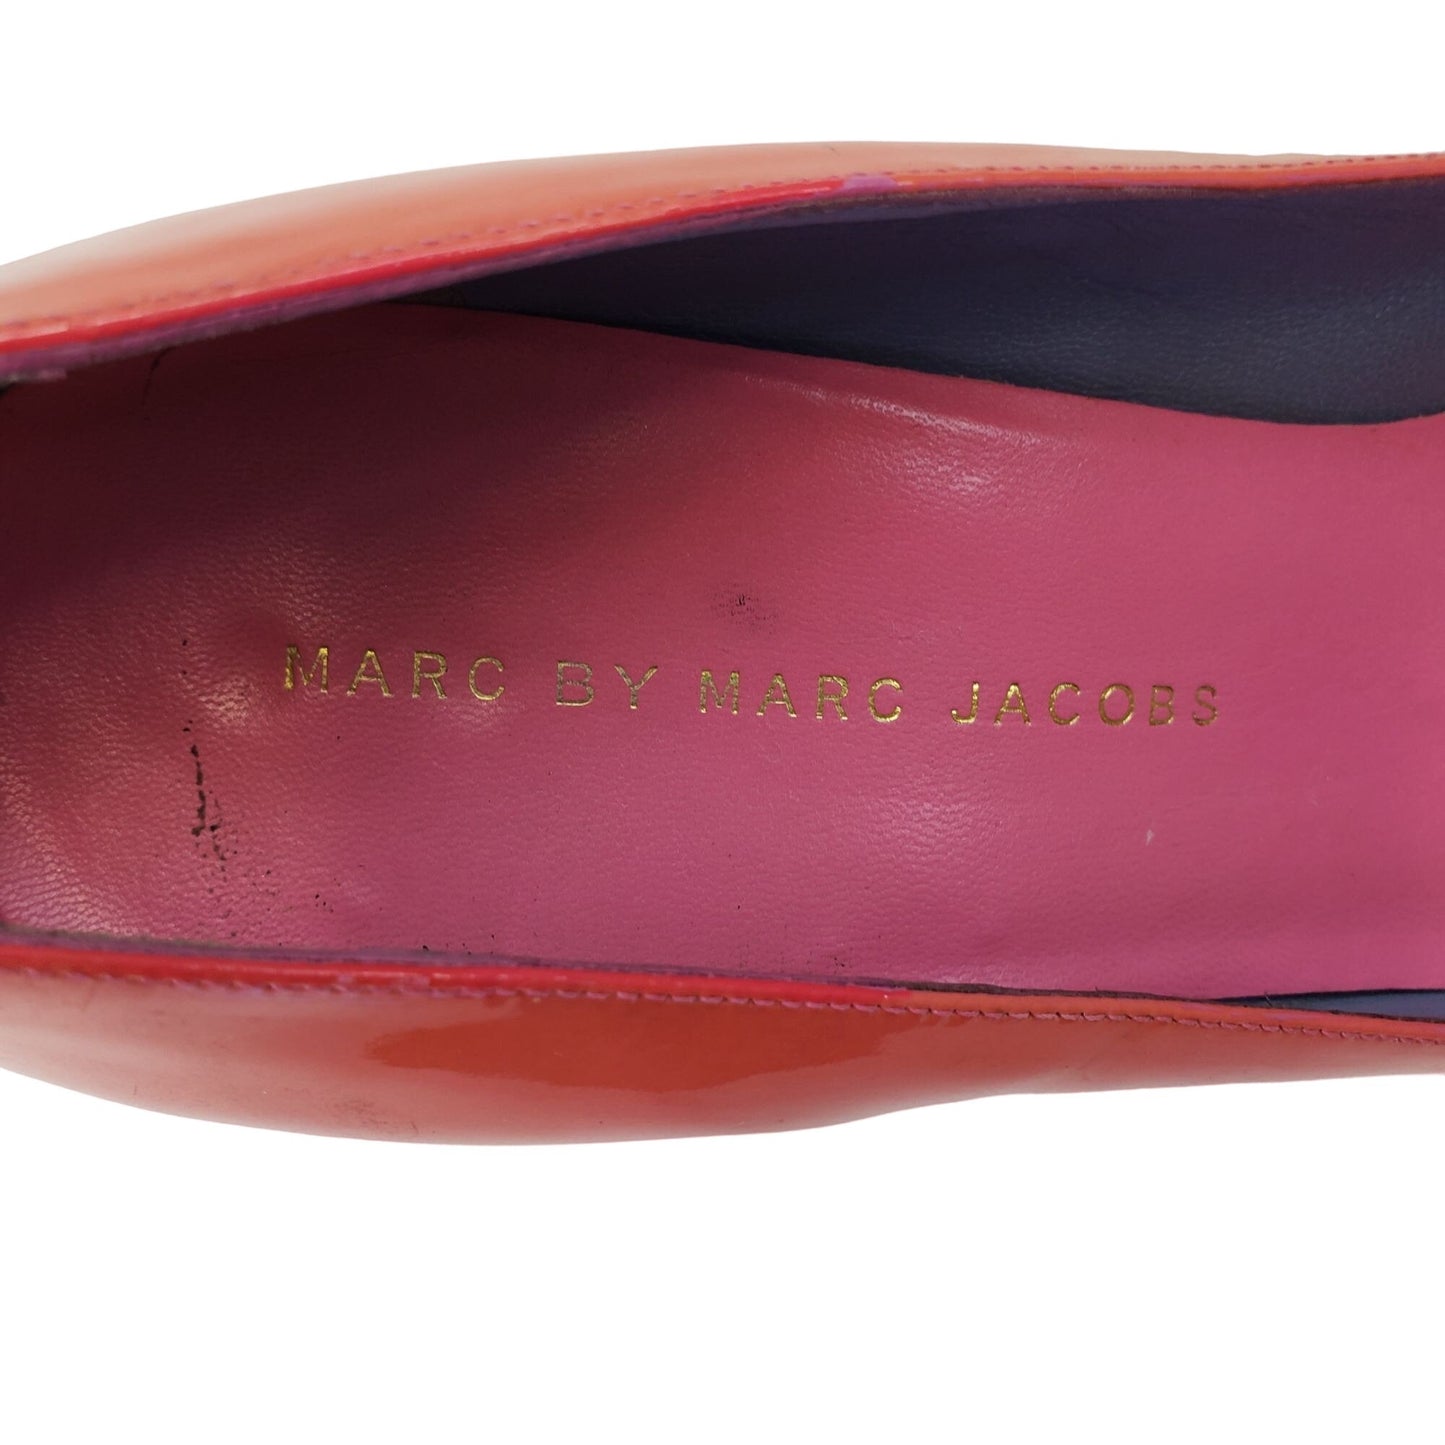 Marc by Marc Jacobs Patent Leather Round Toe Platform Heels Size 38.5/7.5 US